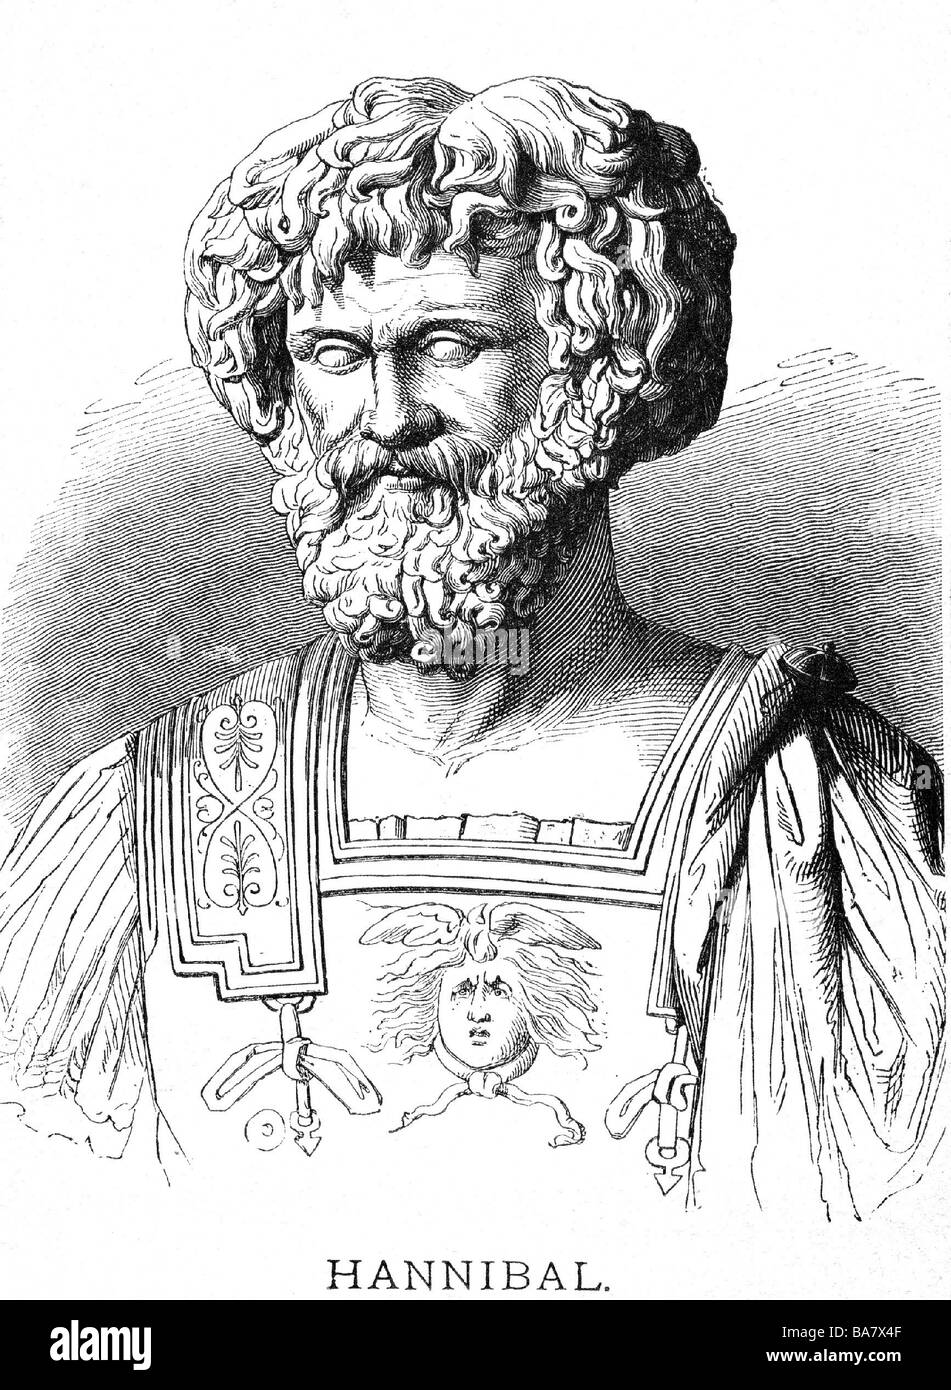 Hannibal, 247 - 183 BC, carthaginian General, portrait, wood engraving, 1896, after ancient bust, National Museum Naples, Stock Photo